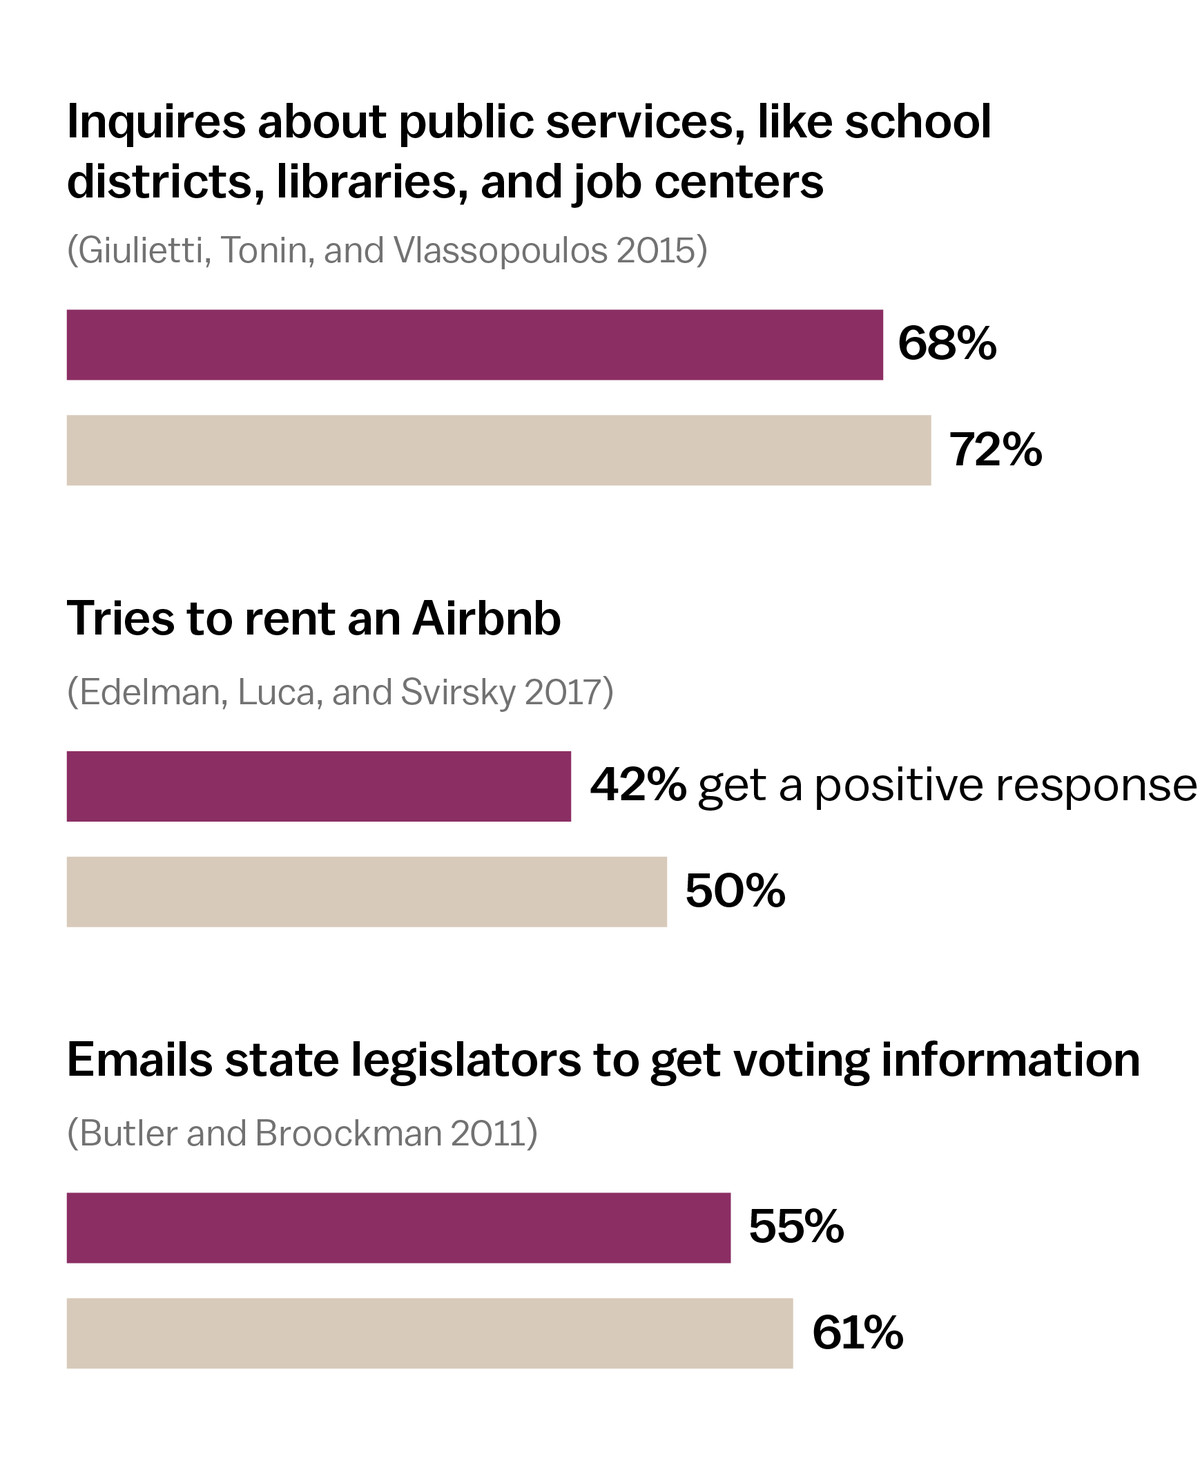 A second chart shows the difference in response rates for inquiries about public services, renting an Airbnb and emailing state legislators. 